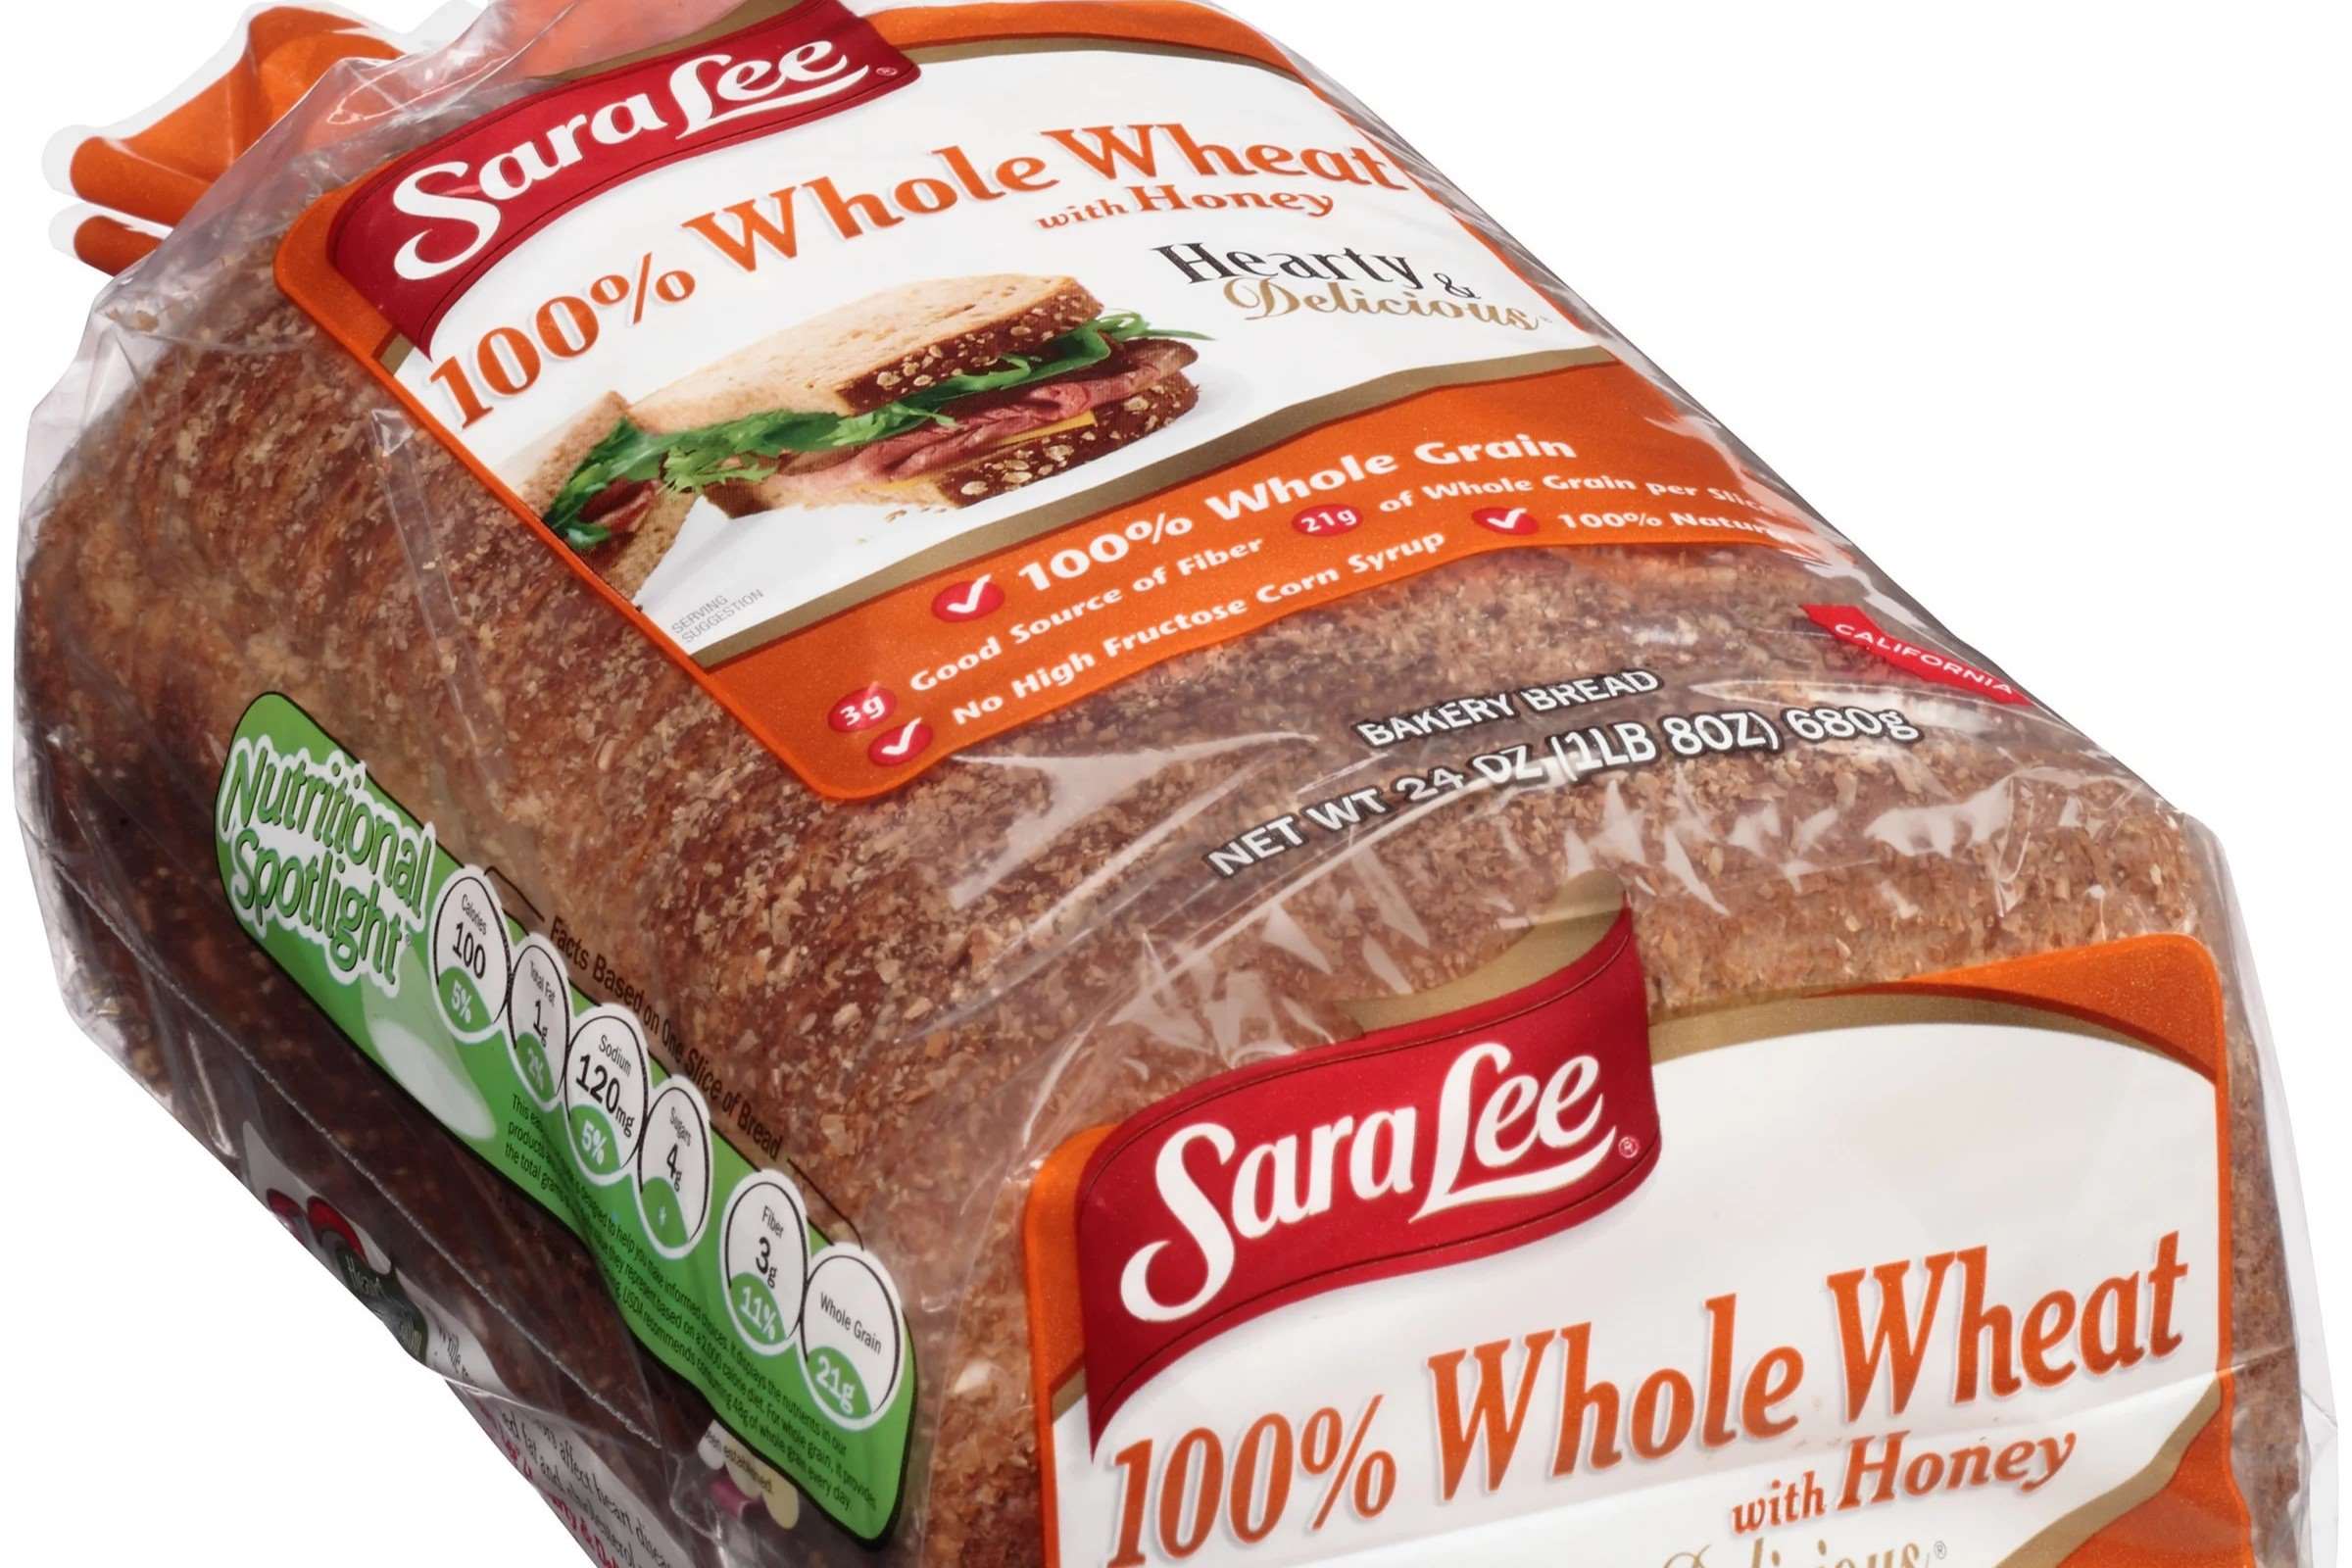 10-sara-lee-whole-wheat-bread-nutrition-facts